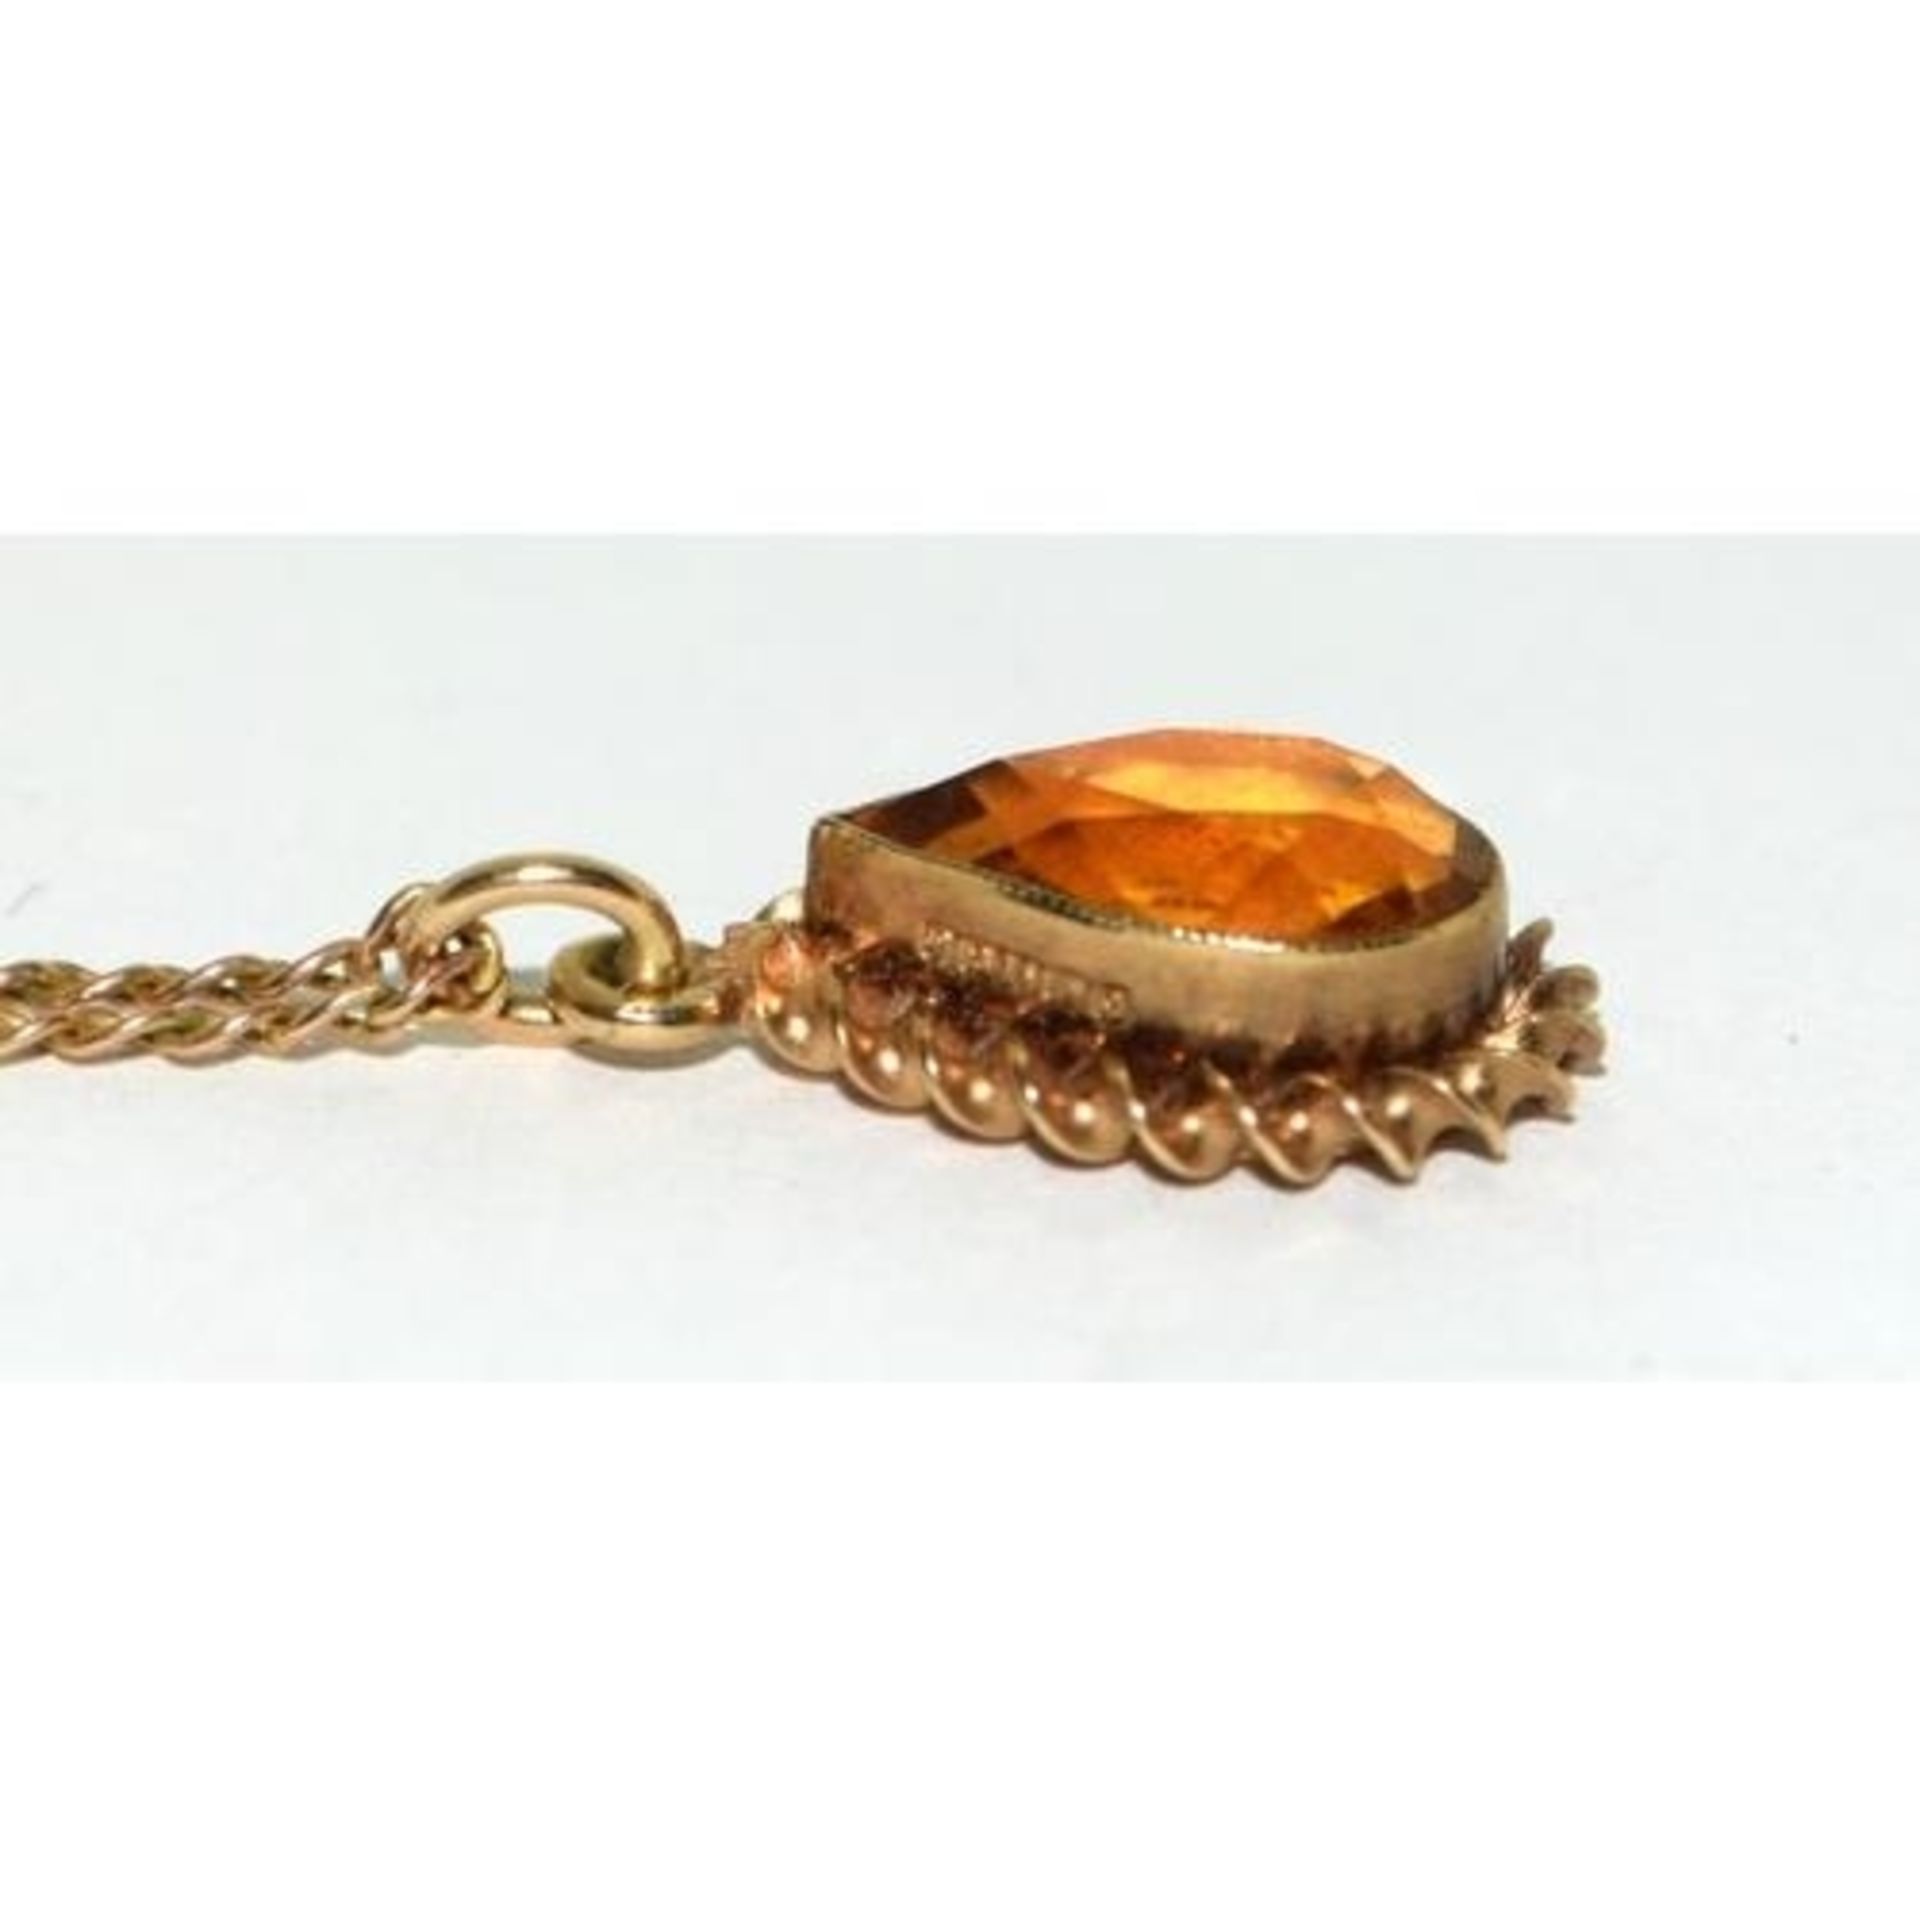 9ct gold Amber pendant necklace chain 42cm long 3g - Image 3 of 5